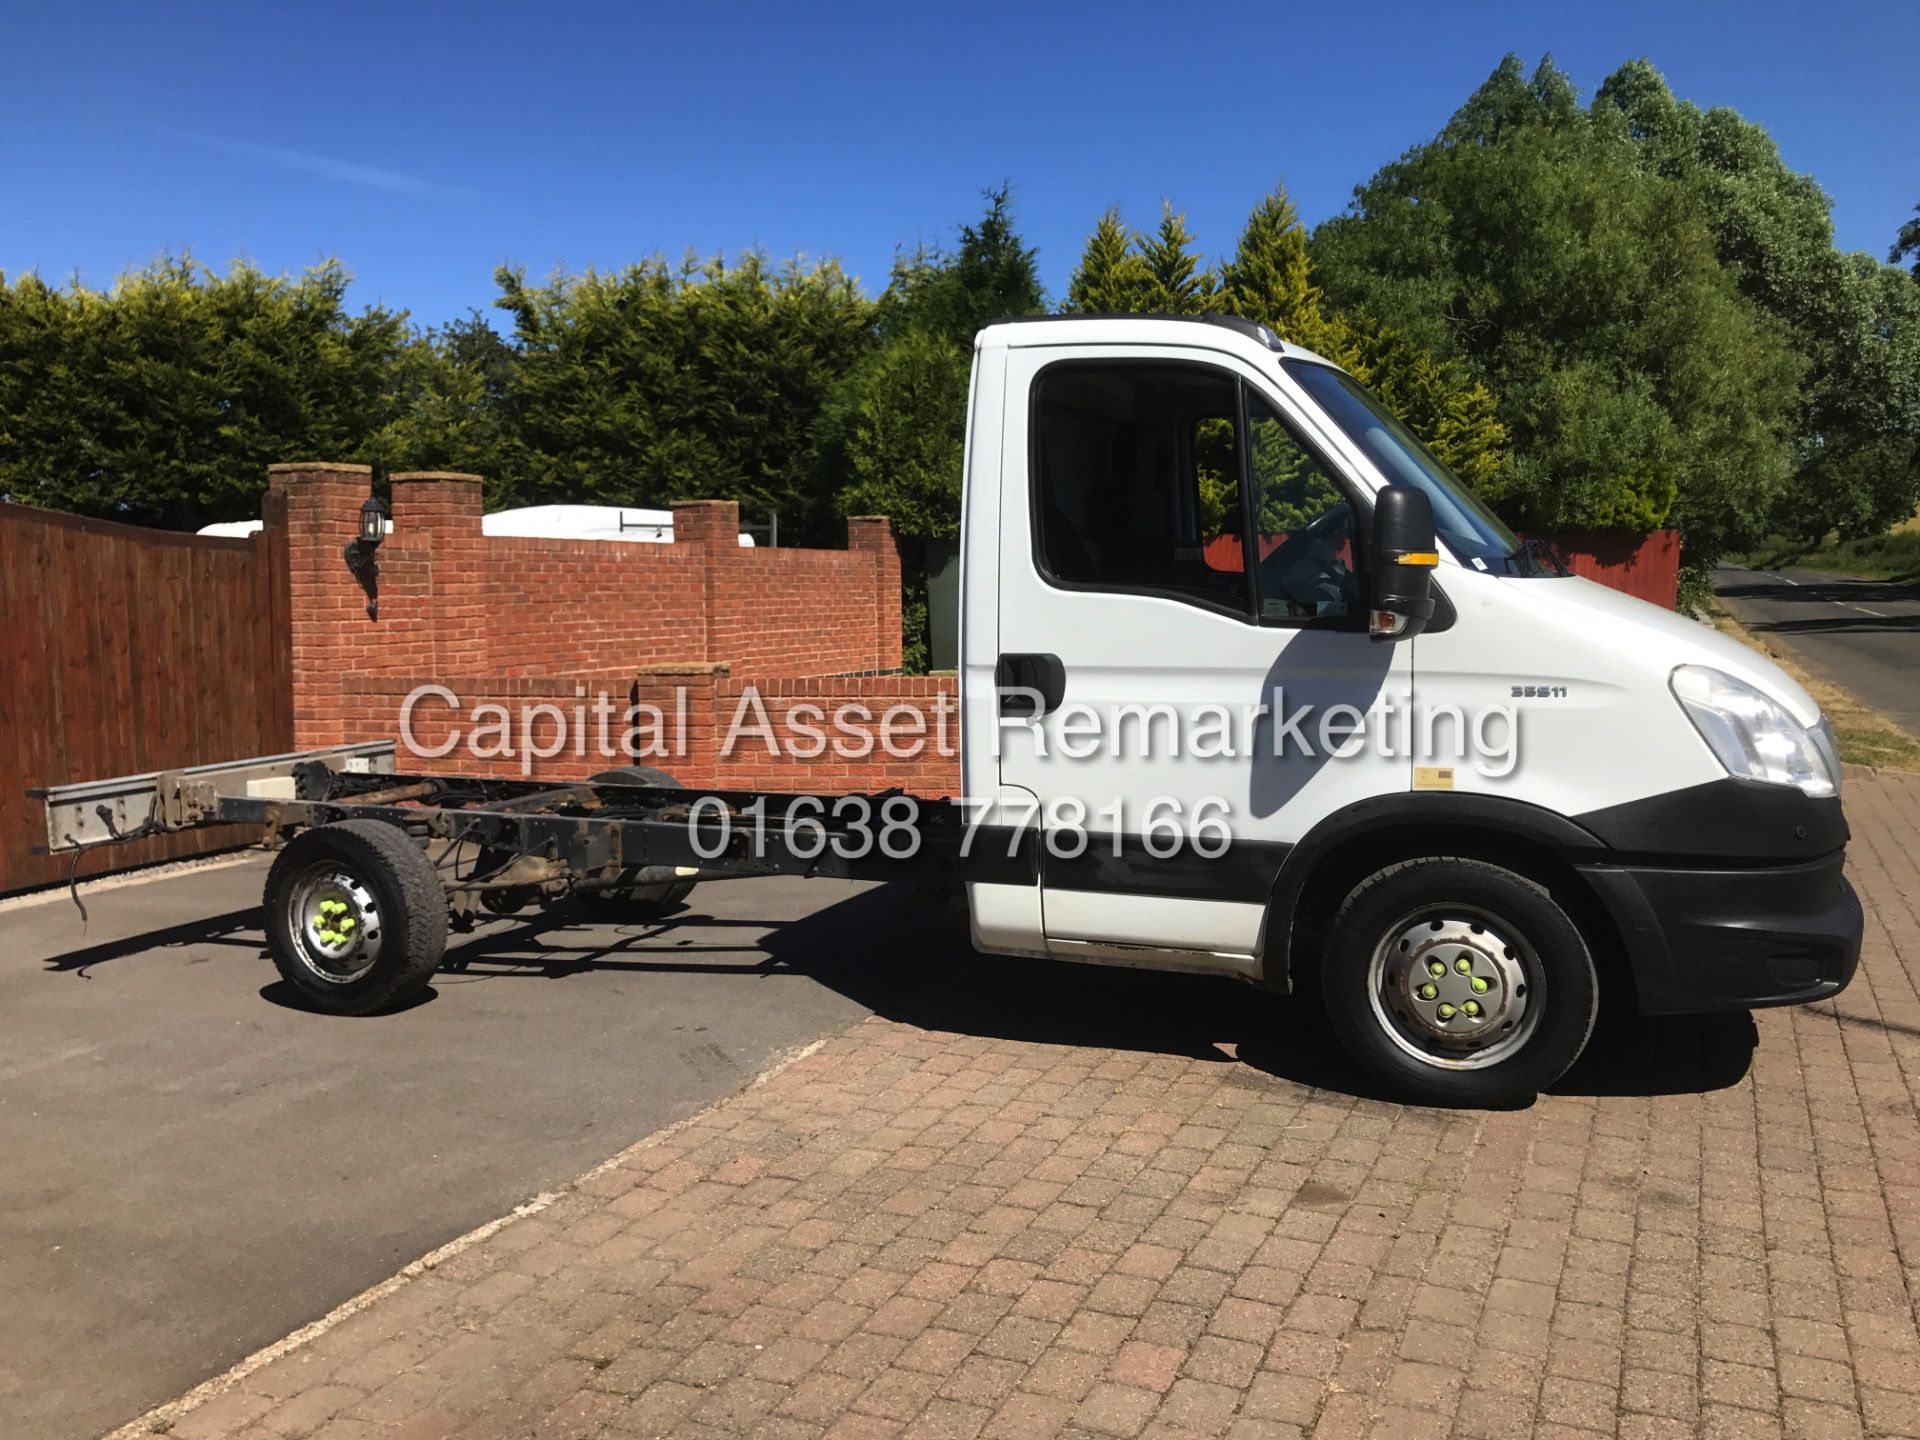 IVECO DAILY LONG WHEEL BASE TRUCK - CAB & CHASSIS - 63 REG - IDEAL RECOVERY VEHICLE / SCAFFOLDING - Image 5 of 10